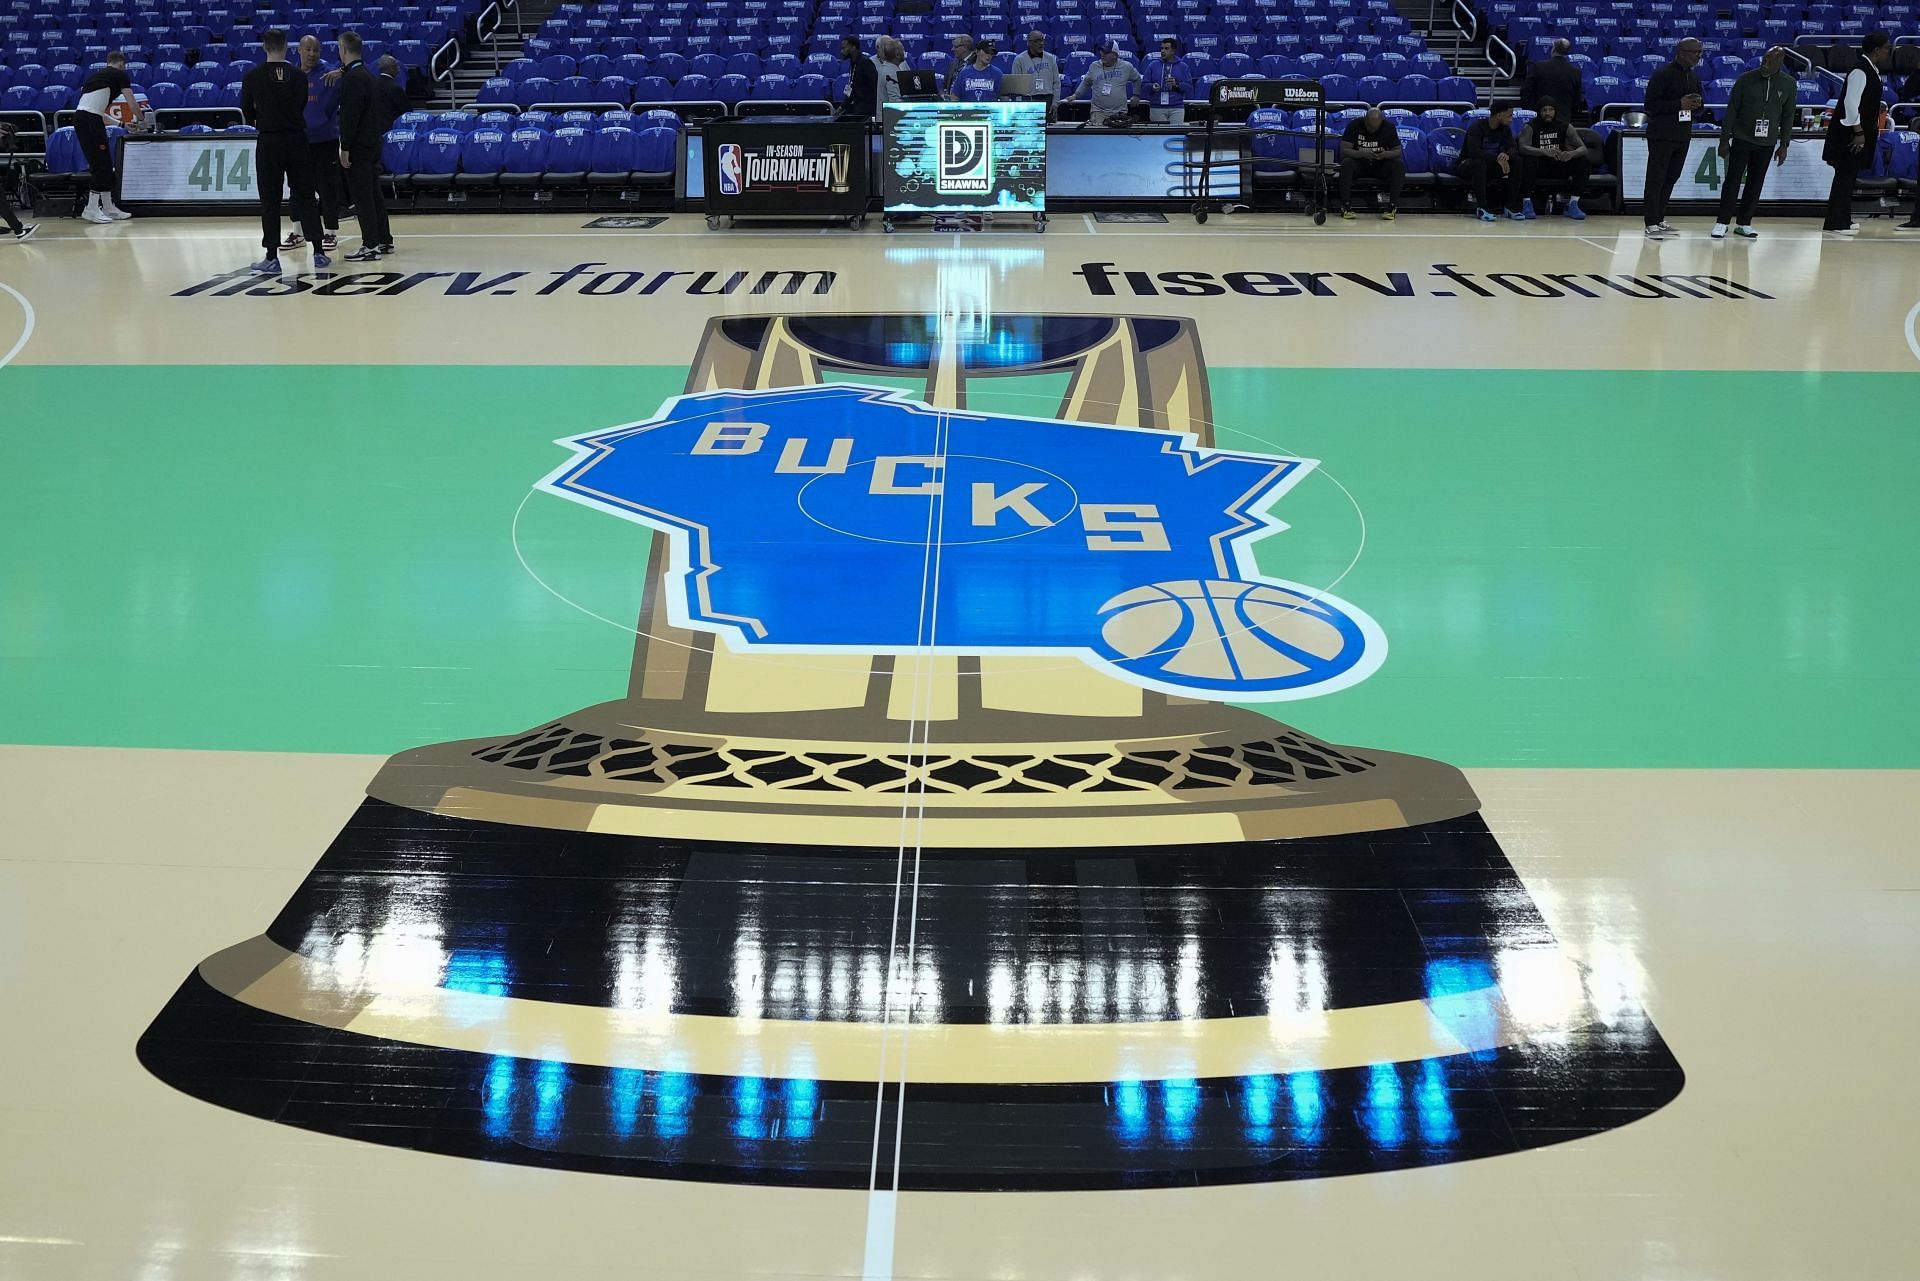 The 30 2023 NBA In-Season Tournament courts, ranked